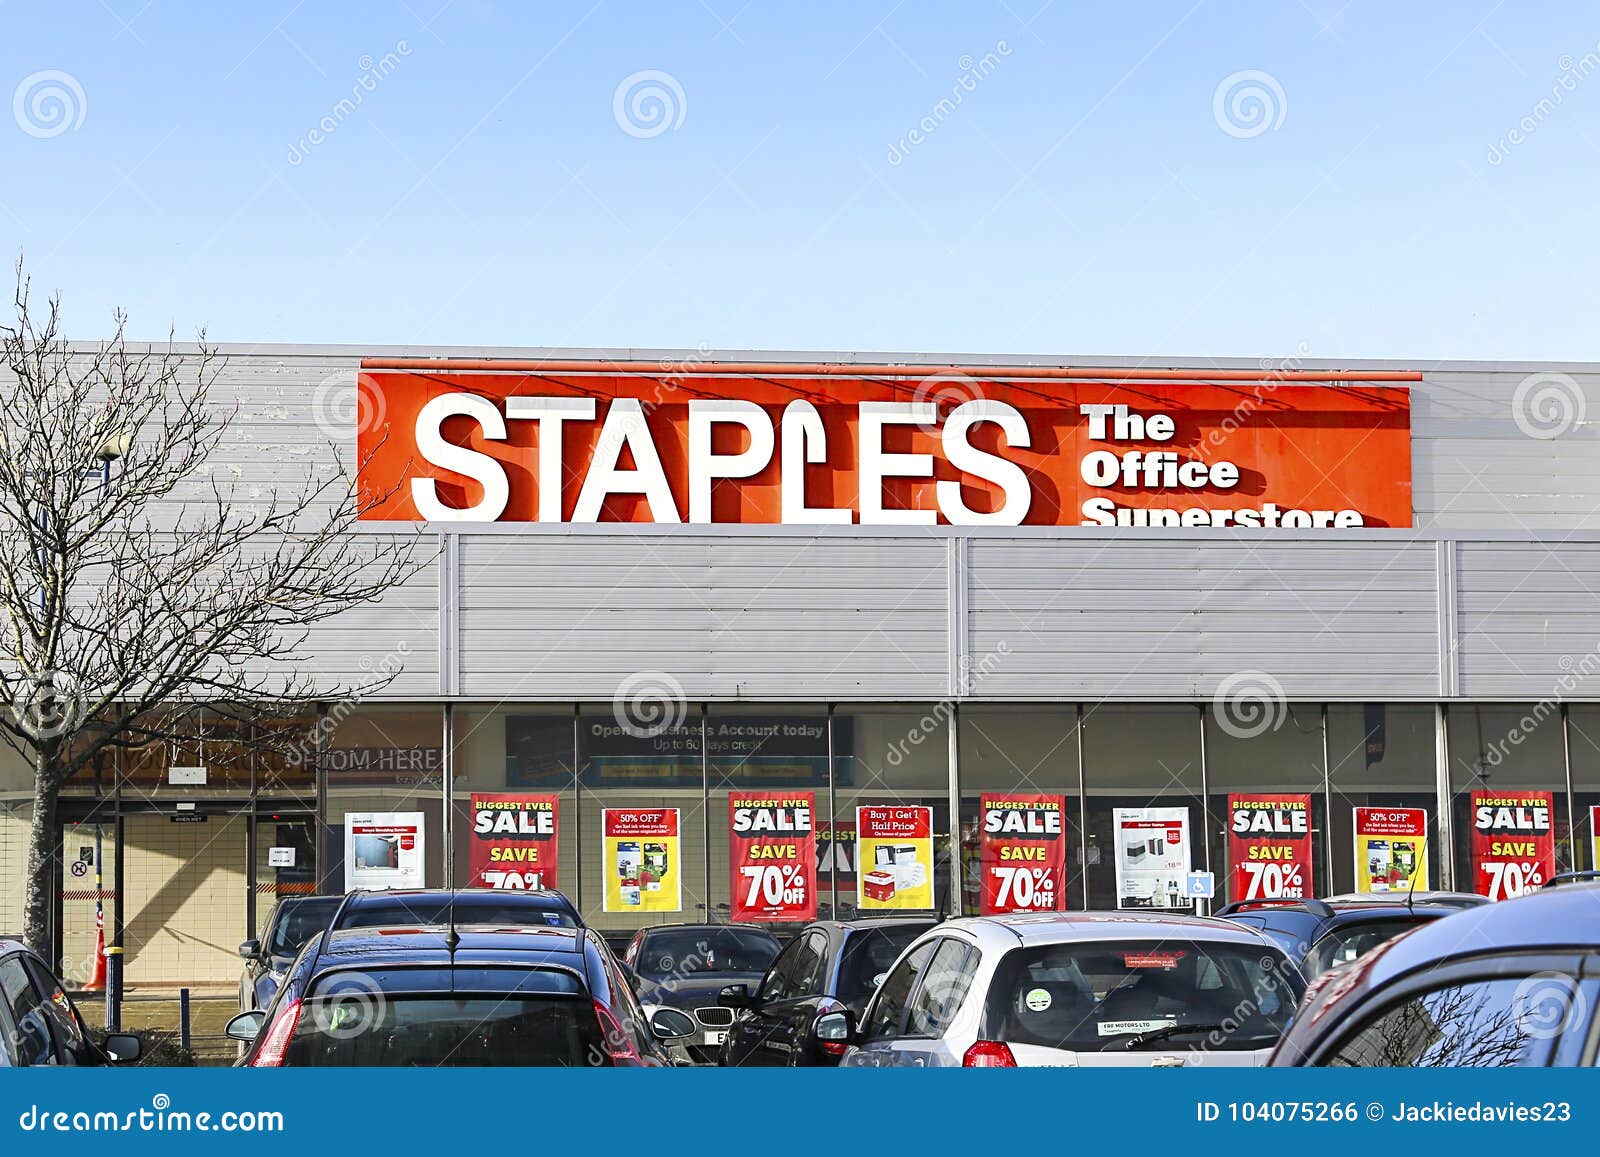 Staples Office Supplies Massive Sale Reductions Swansea Uk January Front View Staples Office Supplies Superstore 104075266 